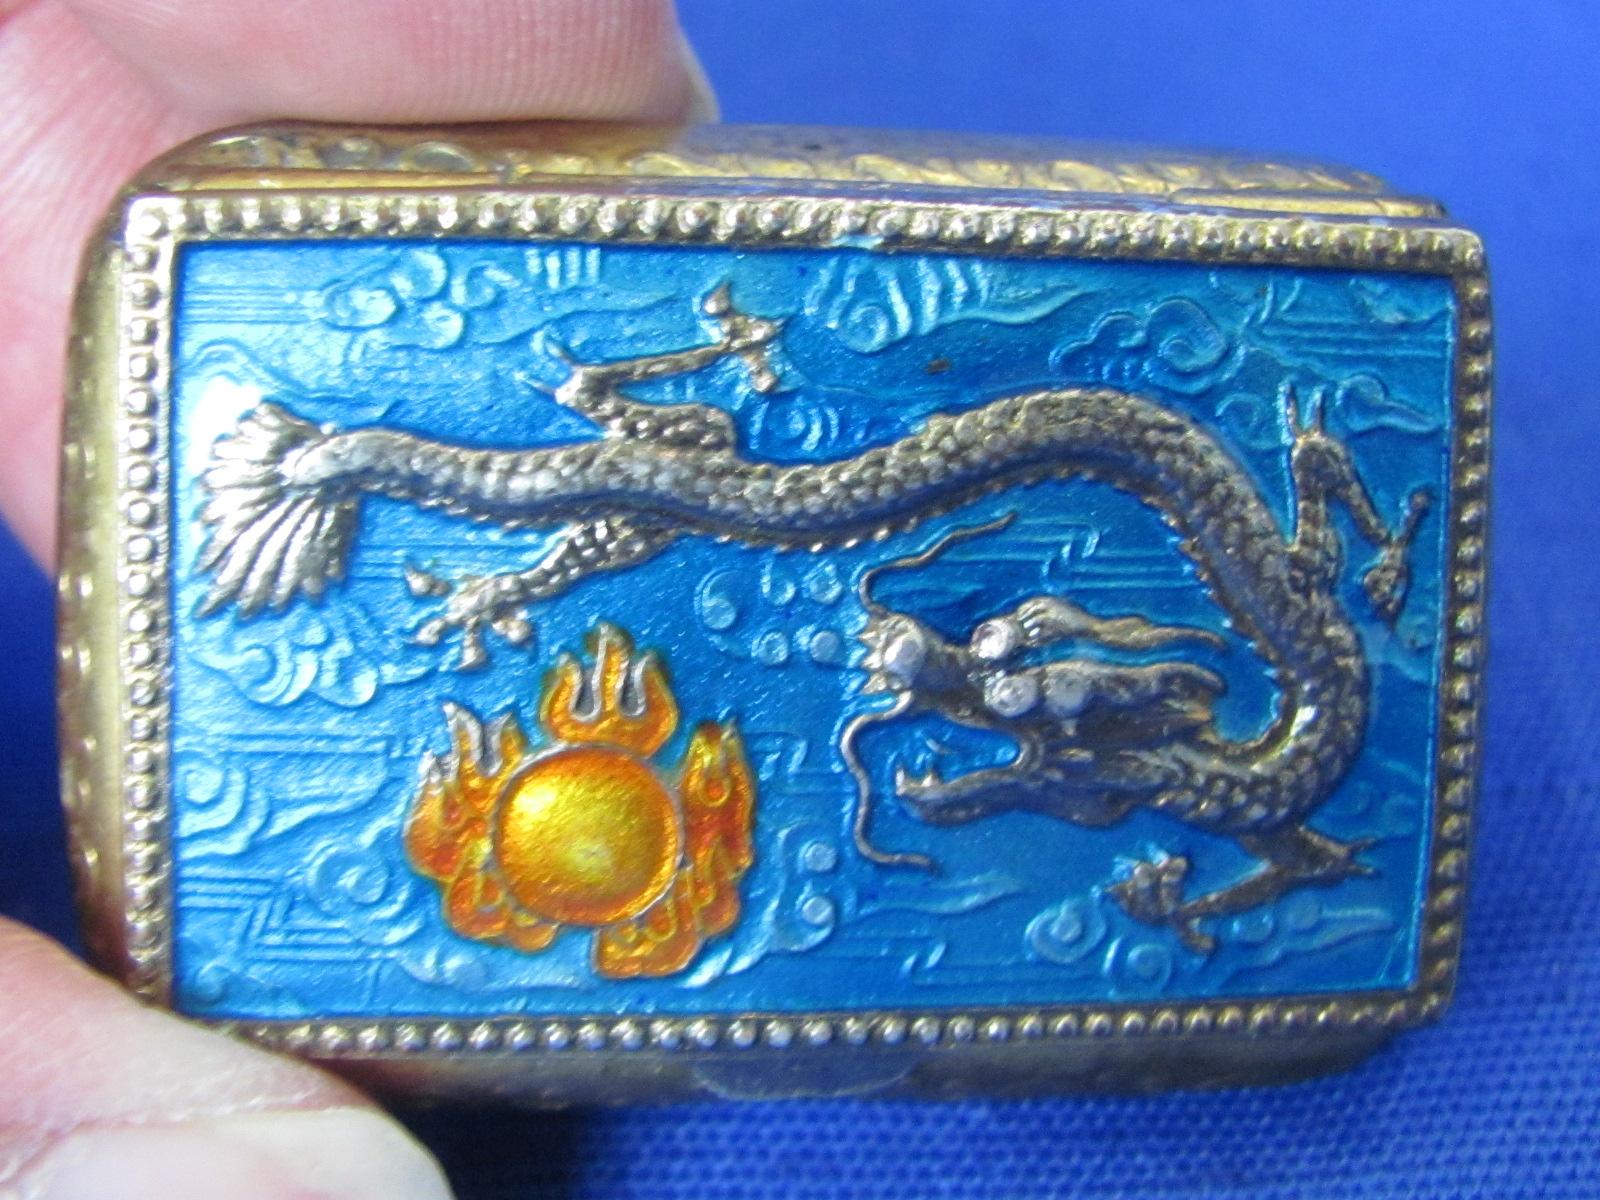 Small Enamel Pill or Snuff Box – Dragon on the Lid – 1 1/2” wide